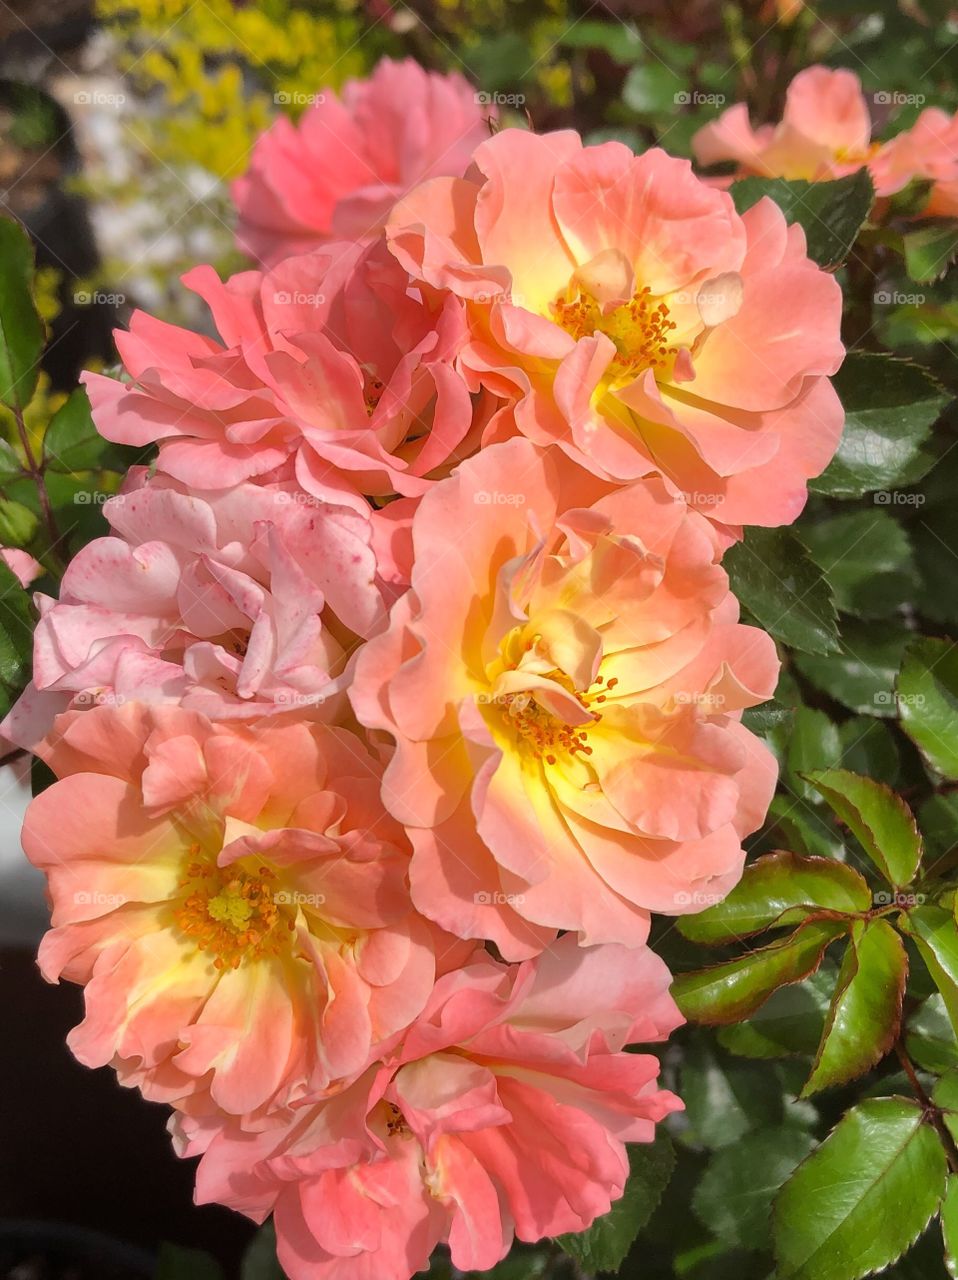 Peach and yellow roses 